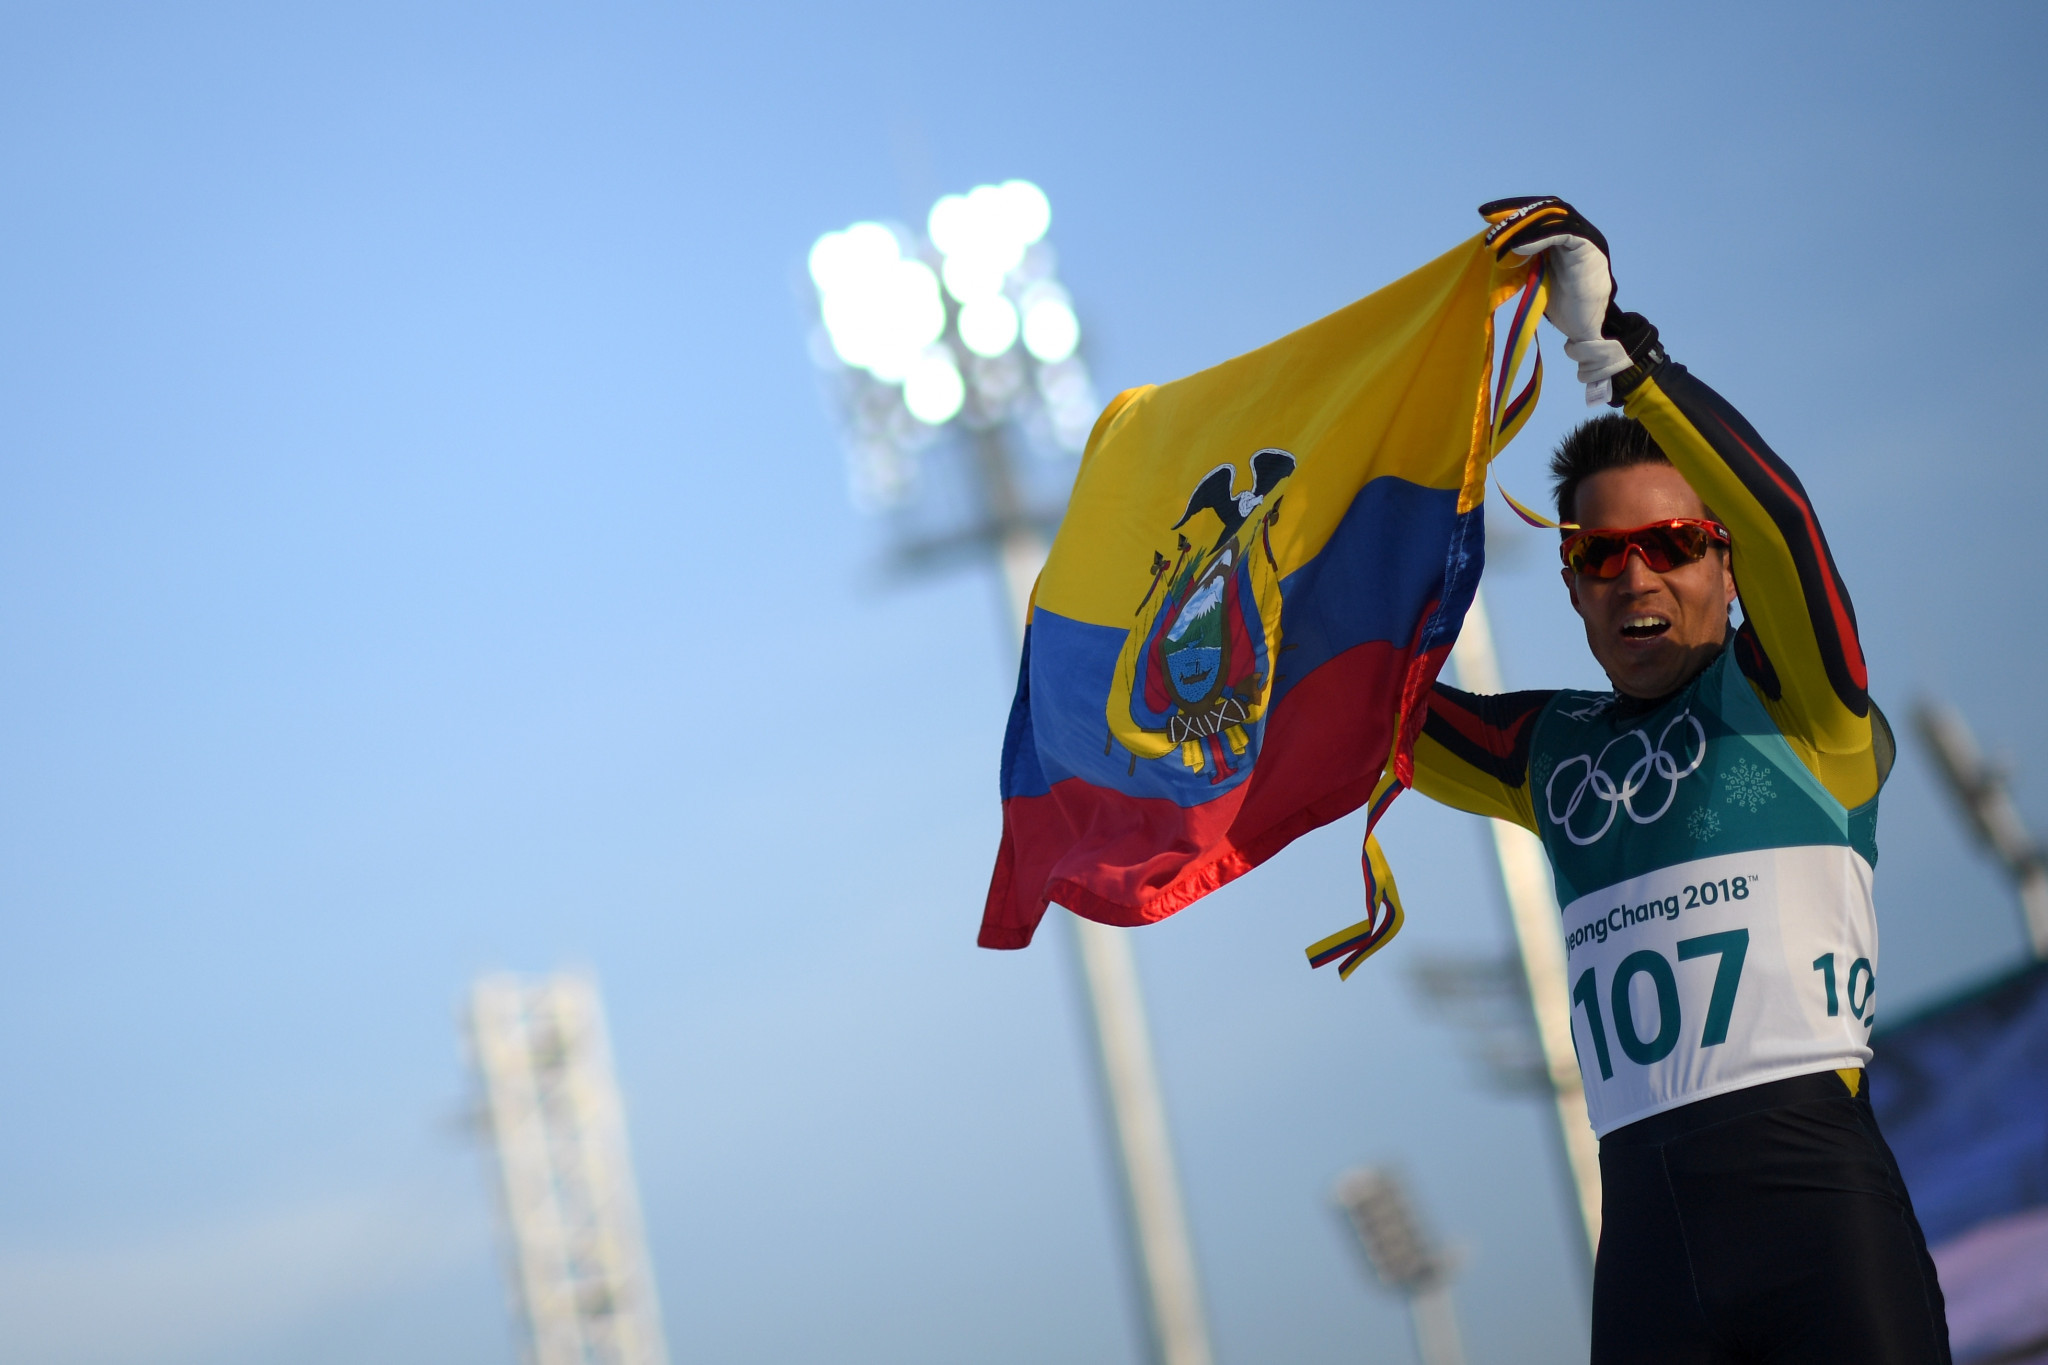 Klaus Jungbluth Rodriguez became Ecuador's first Winter Olympian at Pyeongchang 2018  ©Getty Images